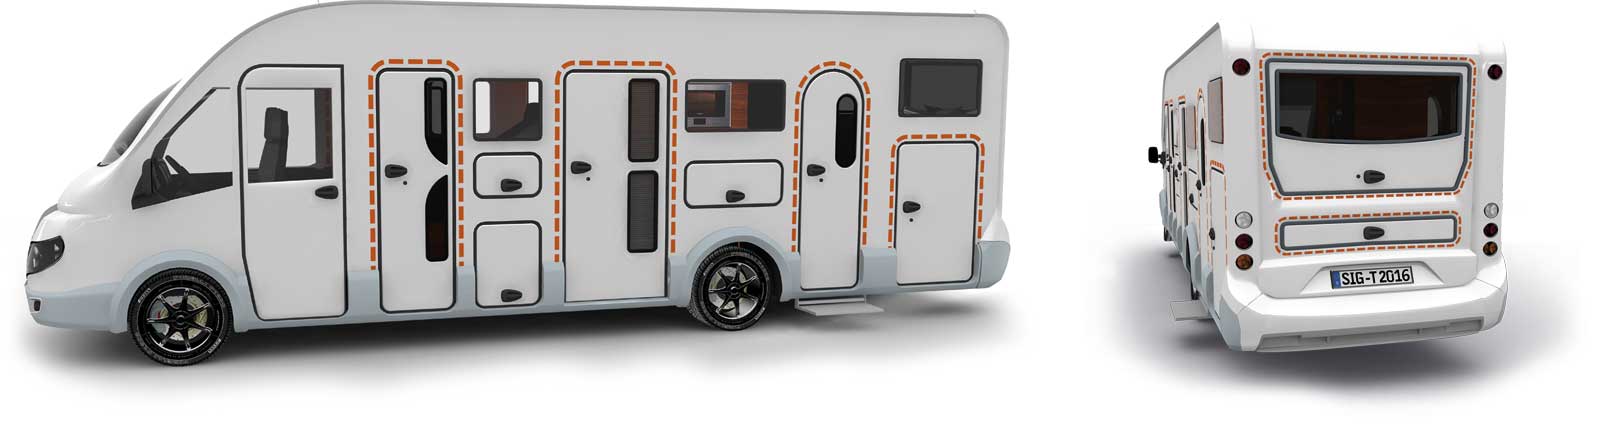 Satisfied tegos customers with Laika caravans and RVs